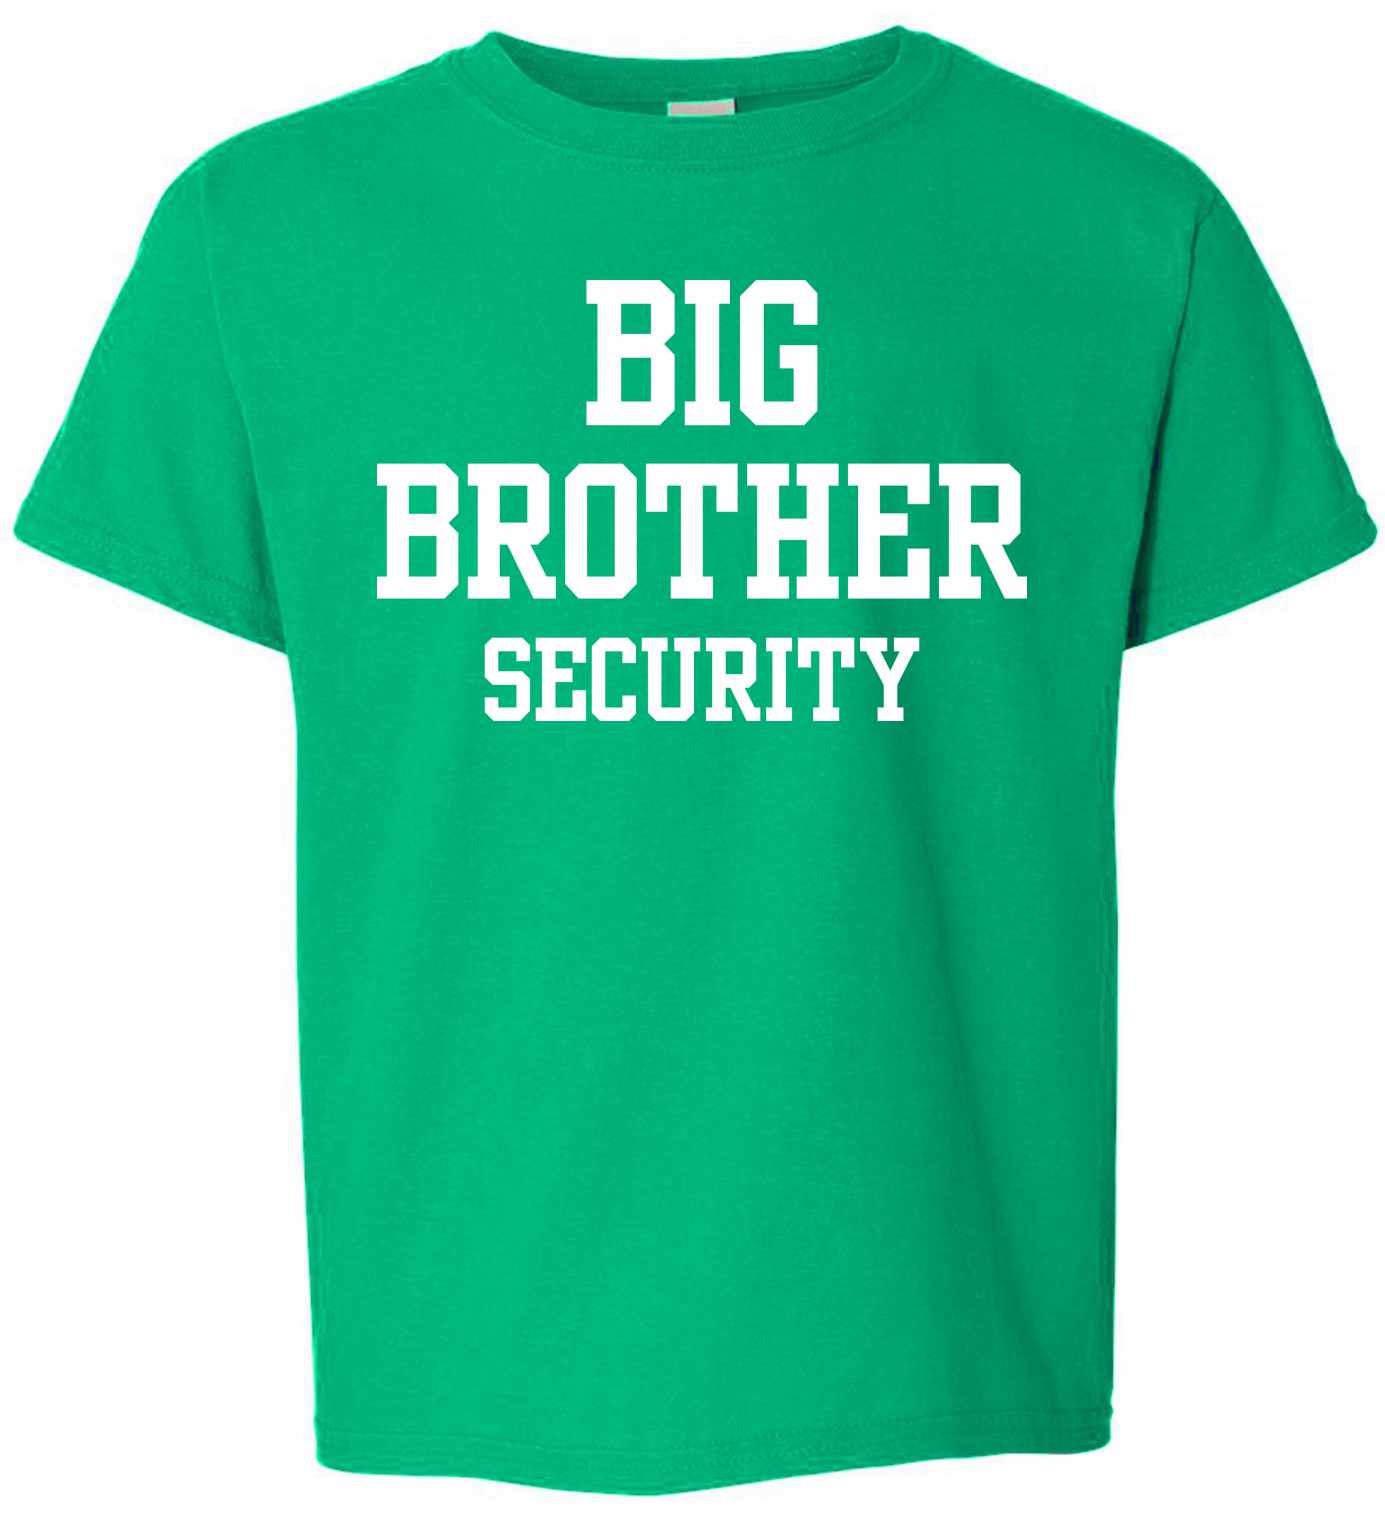 Big Brother Security on Youth T-Shirt